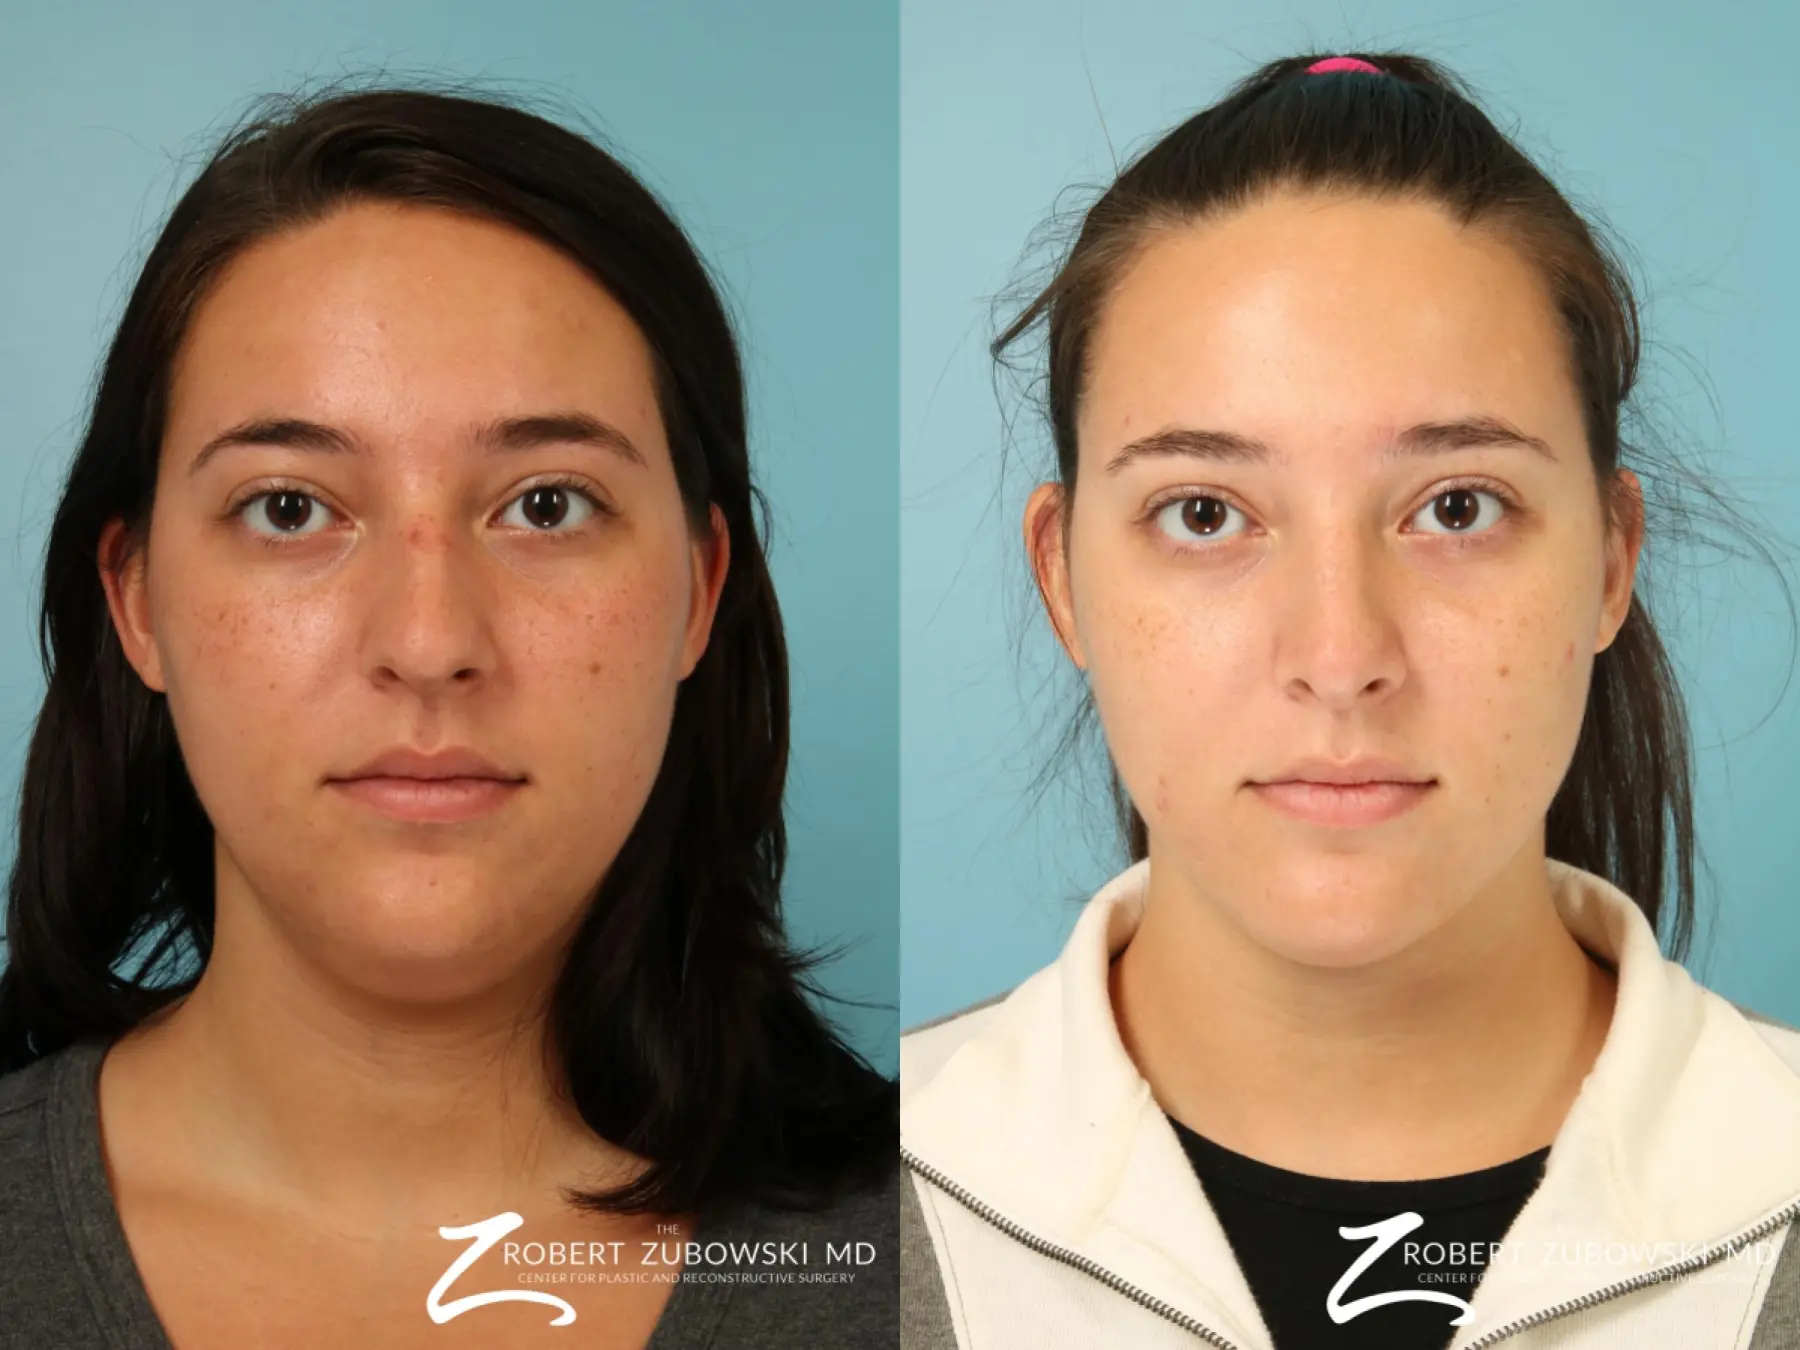 Liposuction Of The Neck: Patient 1 - Before and After 1